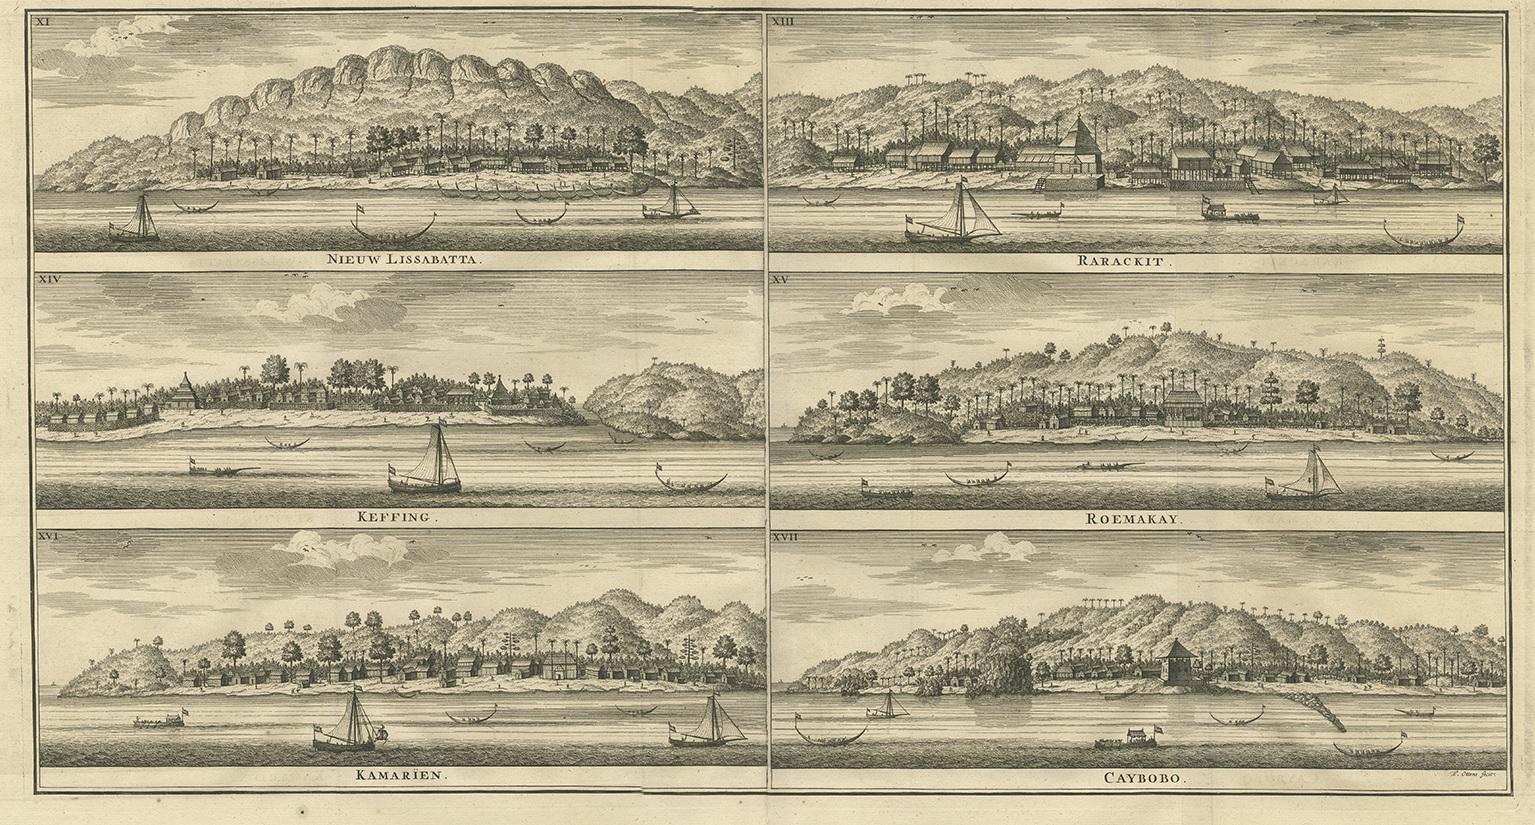 Antique print titled 'Nieuw Lissabatta, Keffing, Kamarïen, Rarackit, Roemakay, Caybobo'. This print shows various Dutch trading posts in Indonesia. This print originates from 'Oud en Nieuw Oost-Indiën' by F. Valentijn.